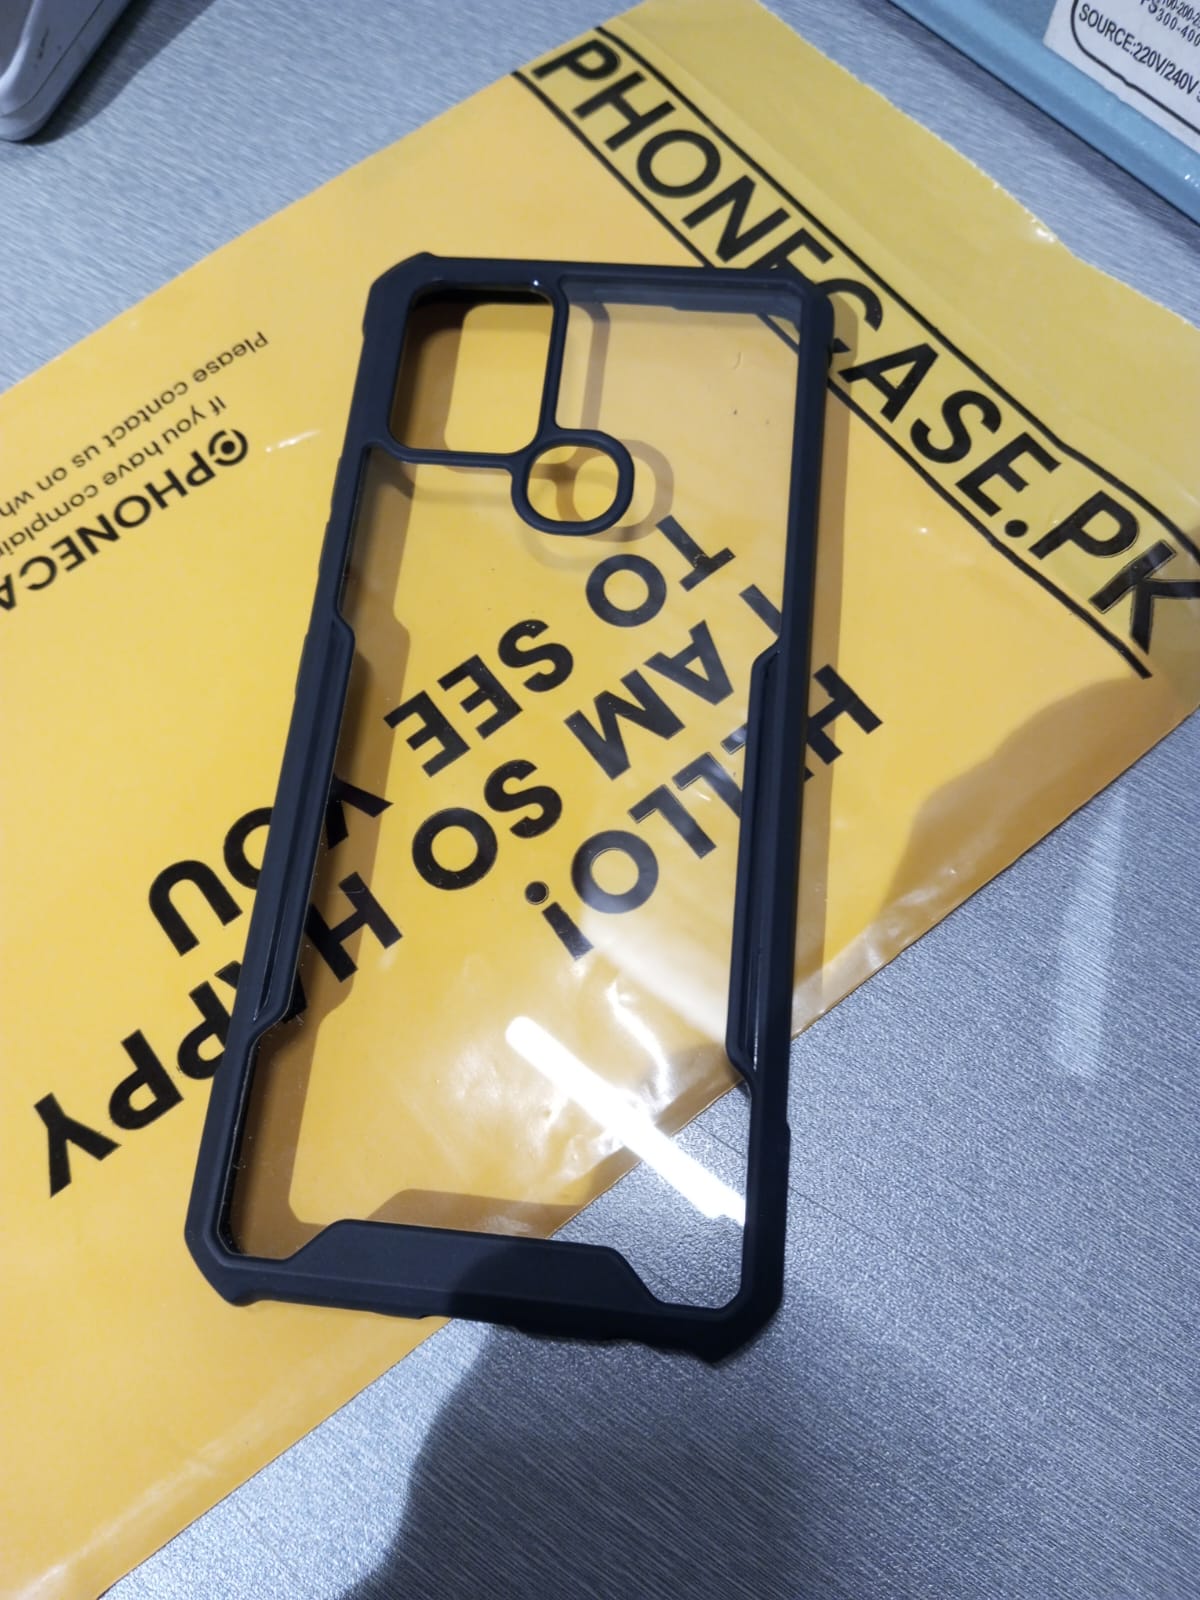 Infinix Branded New Hybrid Bumper Shock proof Case With Ultra Clear Back